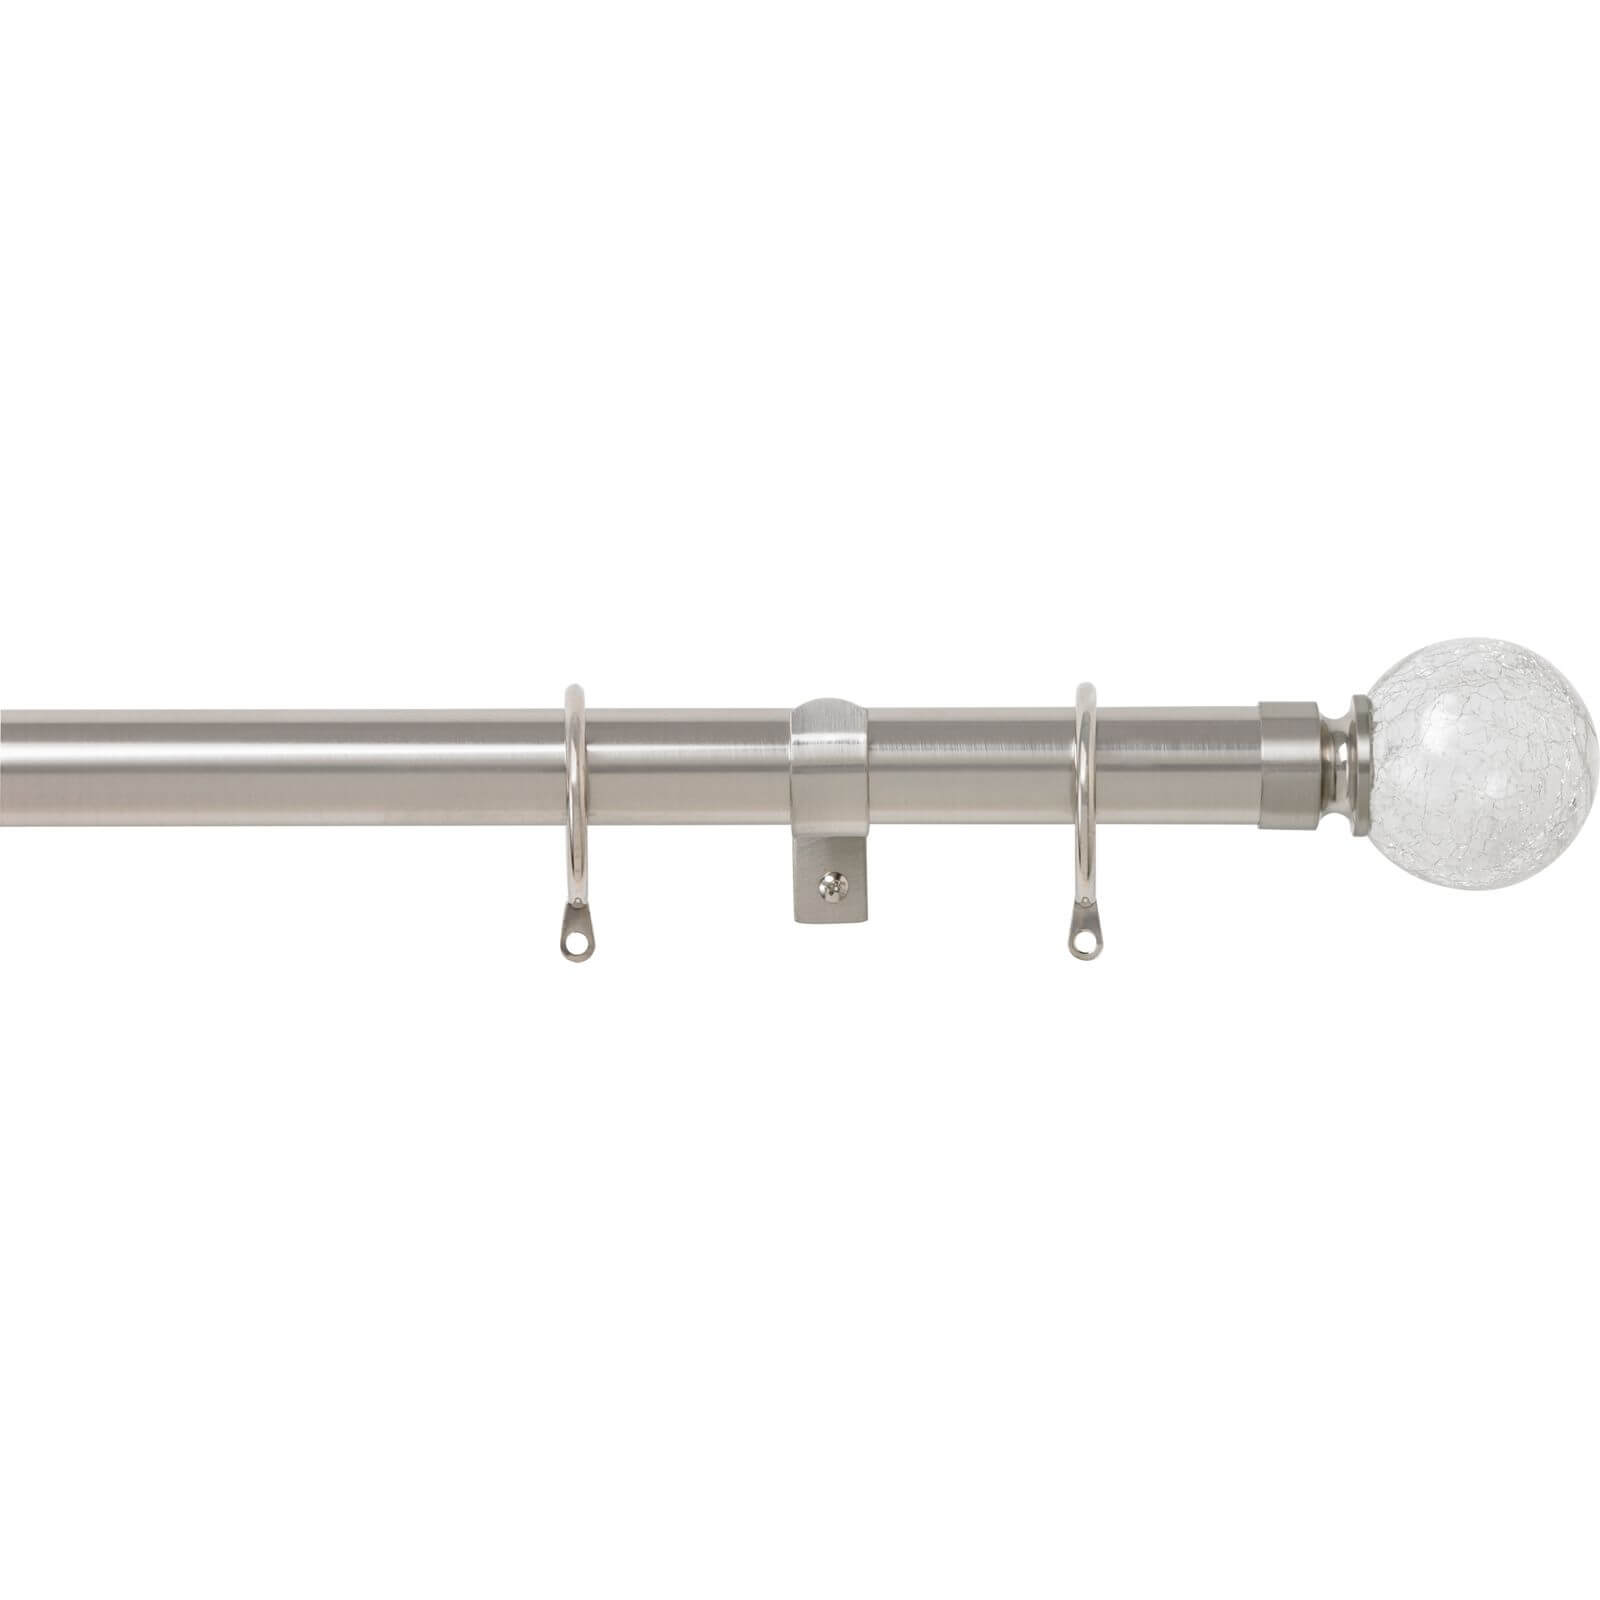 Photo of Satin Steel 28mm Fixed Curtain Pole Crackle 1.8m